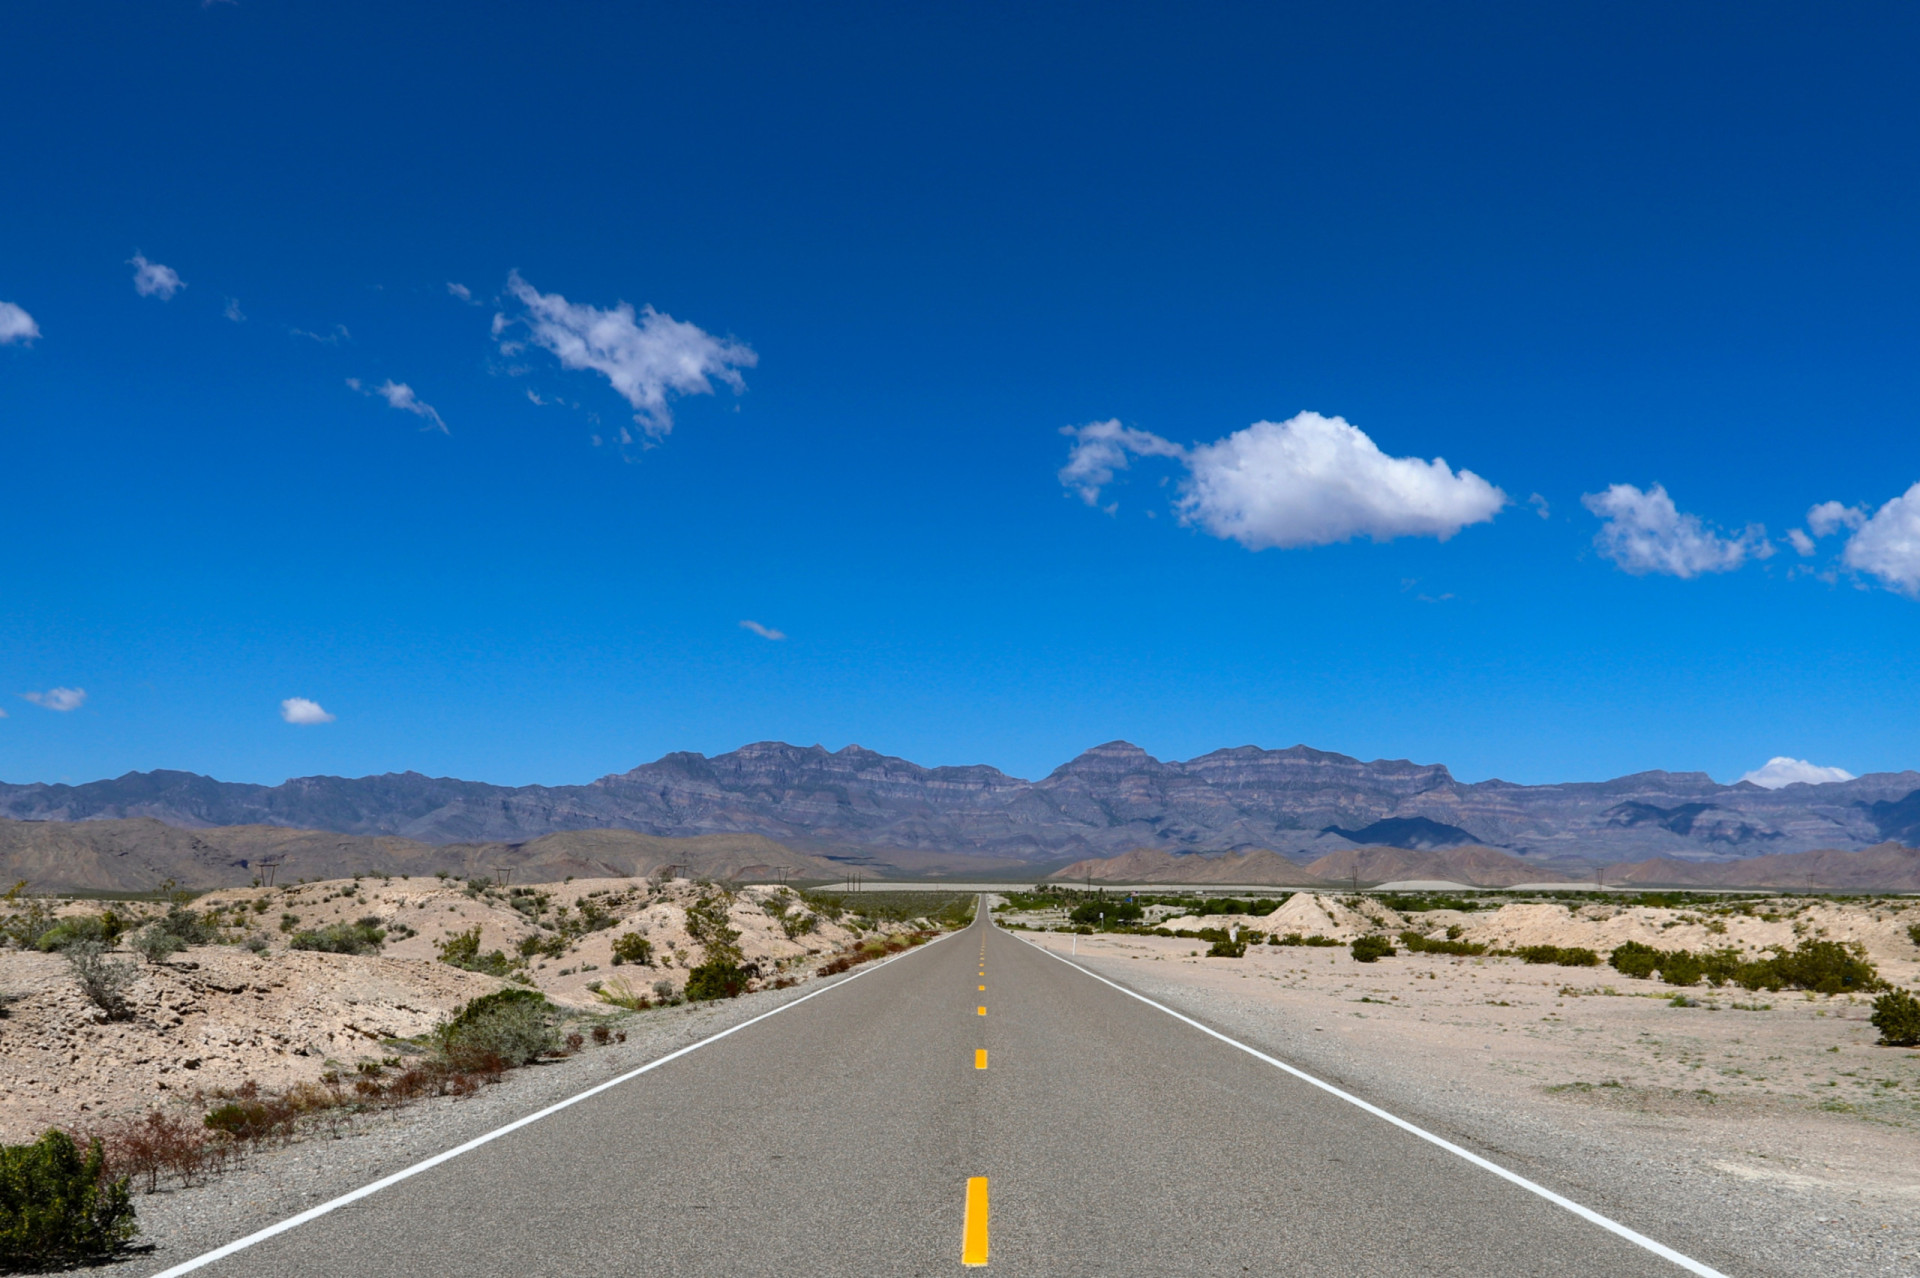 <p>US Route 50 is often called "the loneliest road in the world." Stretching 3,019 miles (4,859 km) from California to Maryland, the highway runs through mostly rural desert and mountains.</p><p>You may also like:<a href="https://www.starsinsider.com/n/492727?utm_source=msn.com&utm_medium=display&utm_campaign=referral_description&utm_content=697904en-us"> The longest films Hollywood ever made</a></p>